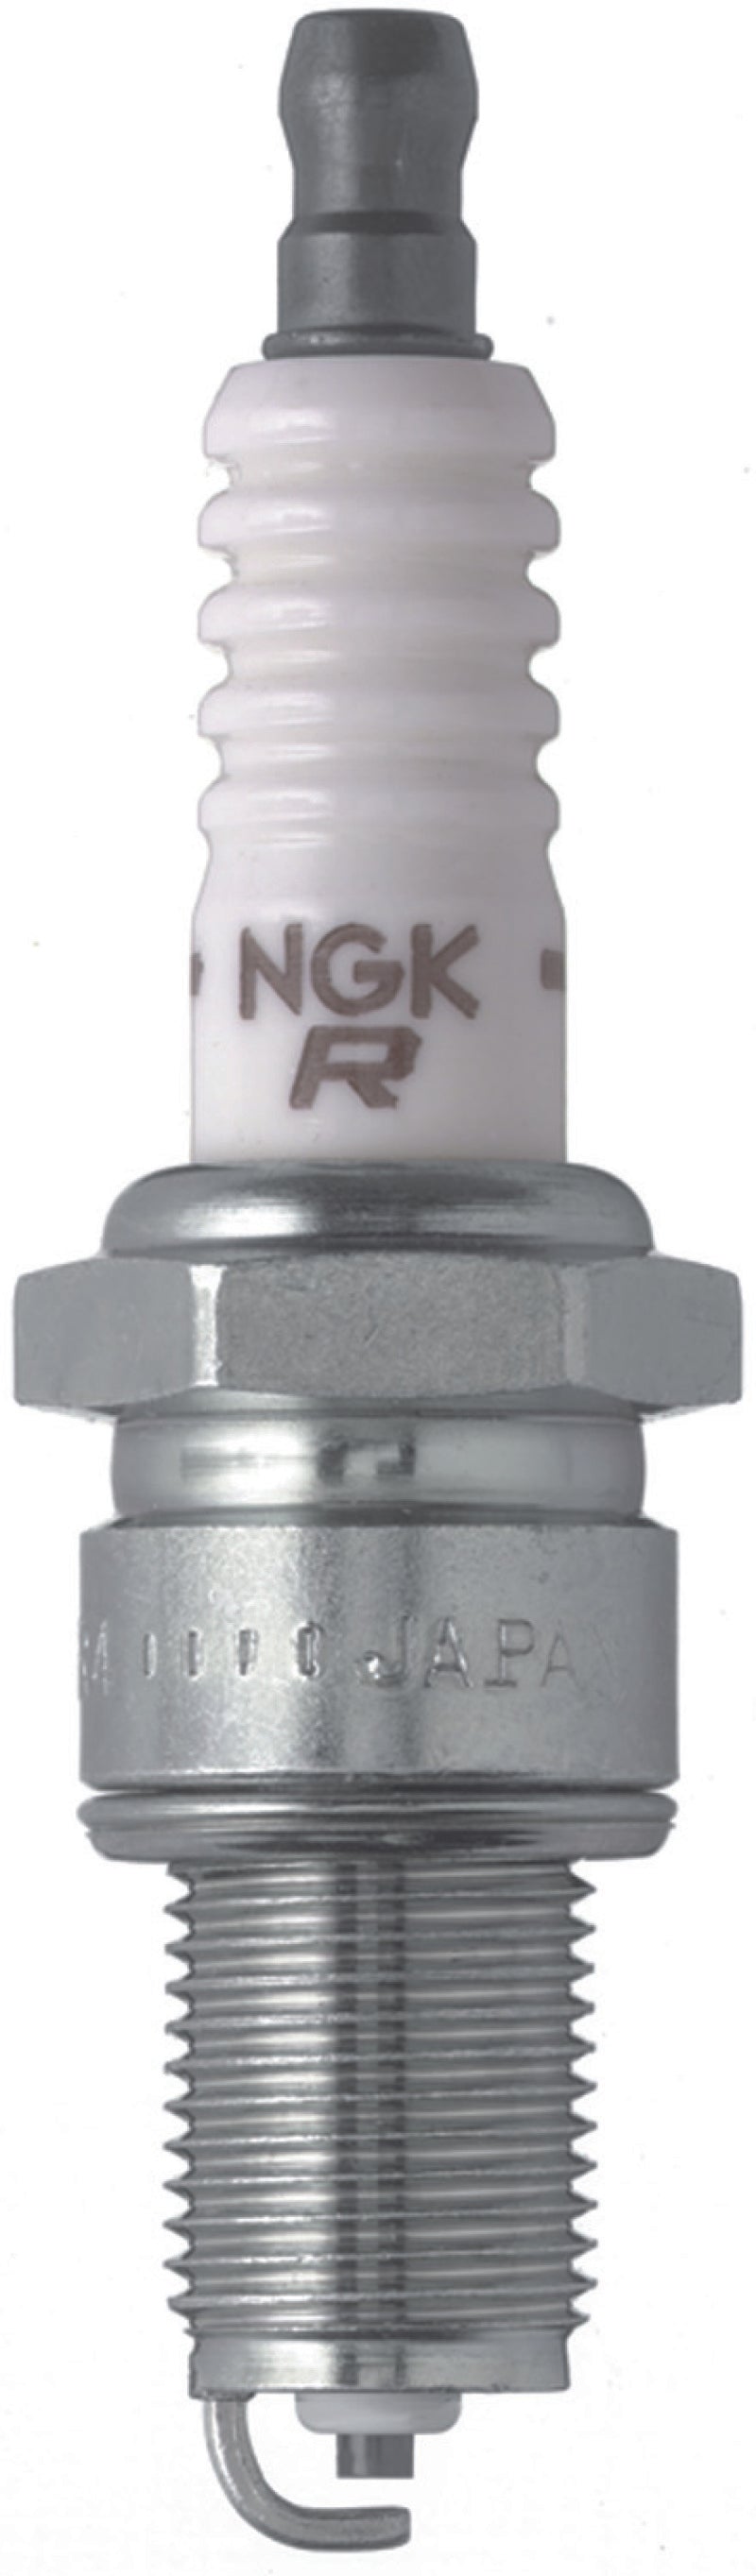 NGK Traditional Spark Plug Box of 4 (BPR9ES) -  Shop now at Performance Car Parts